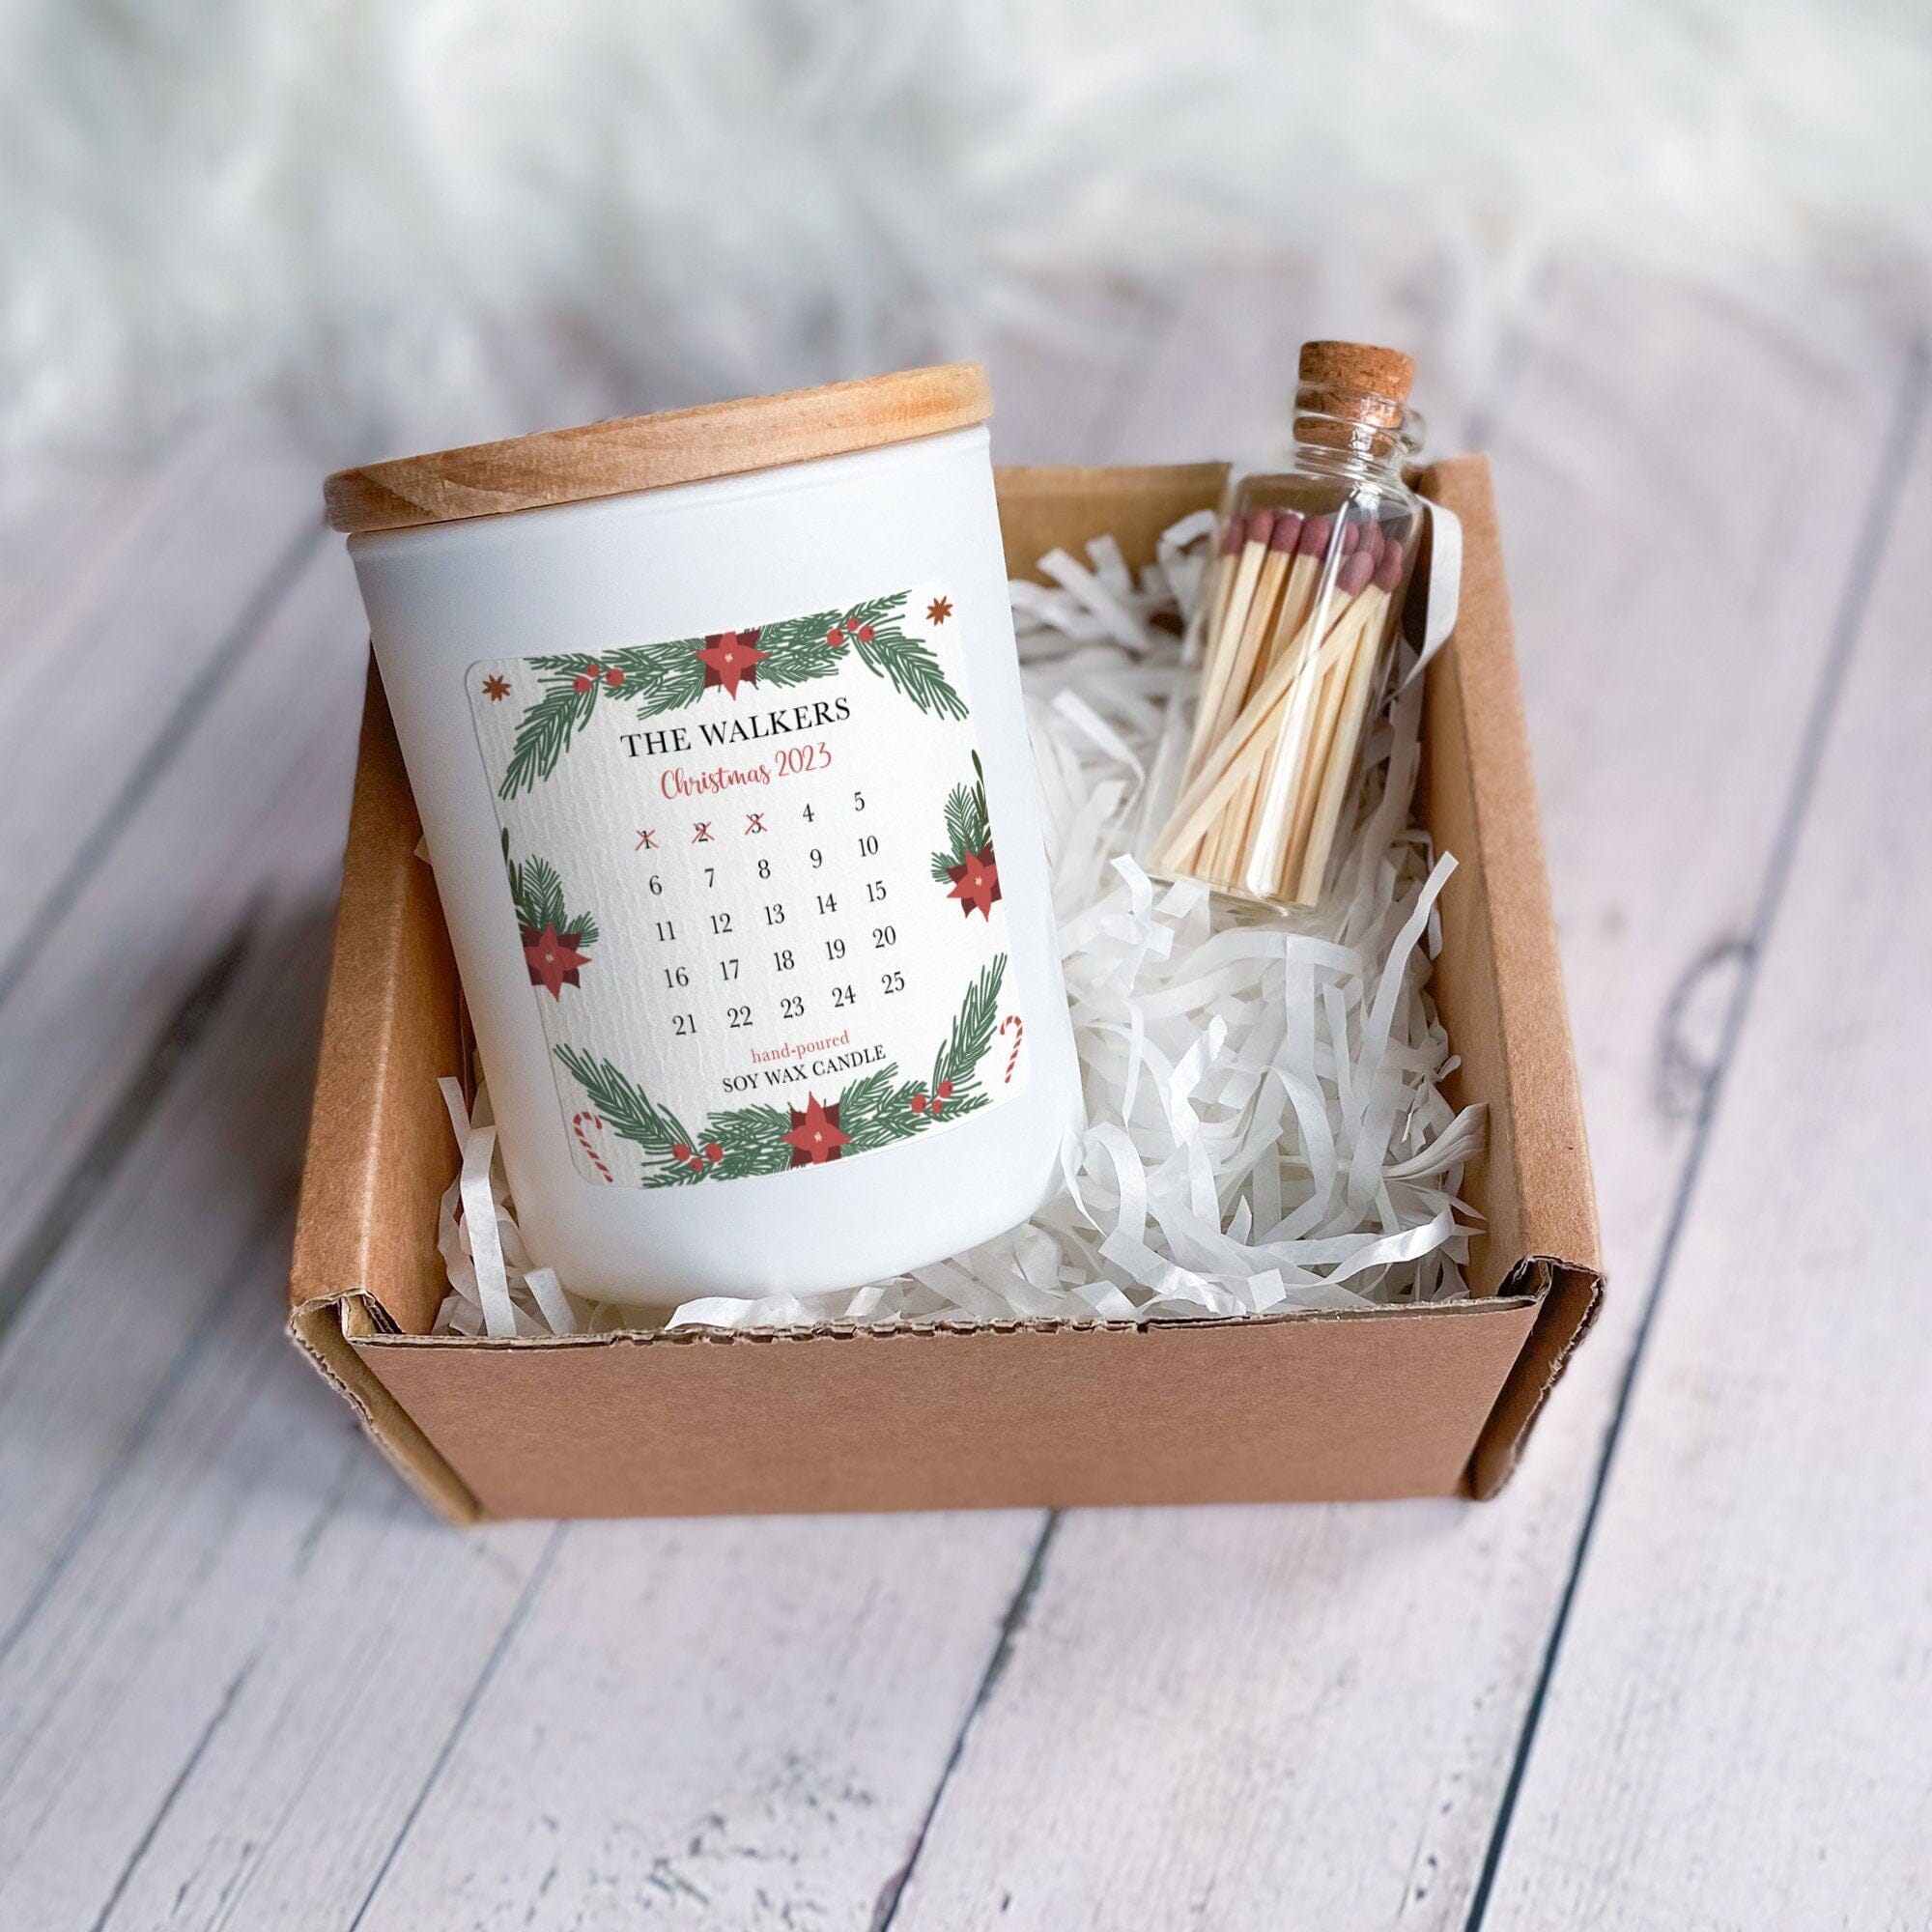 Personalised Scented Christmas Advent Calendar Candle Gift Set, Contemporary Christmas Gift, Cosy Candle Advent